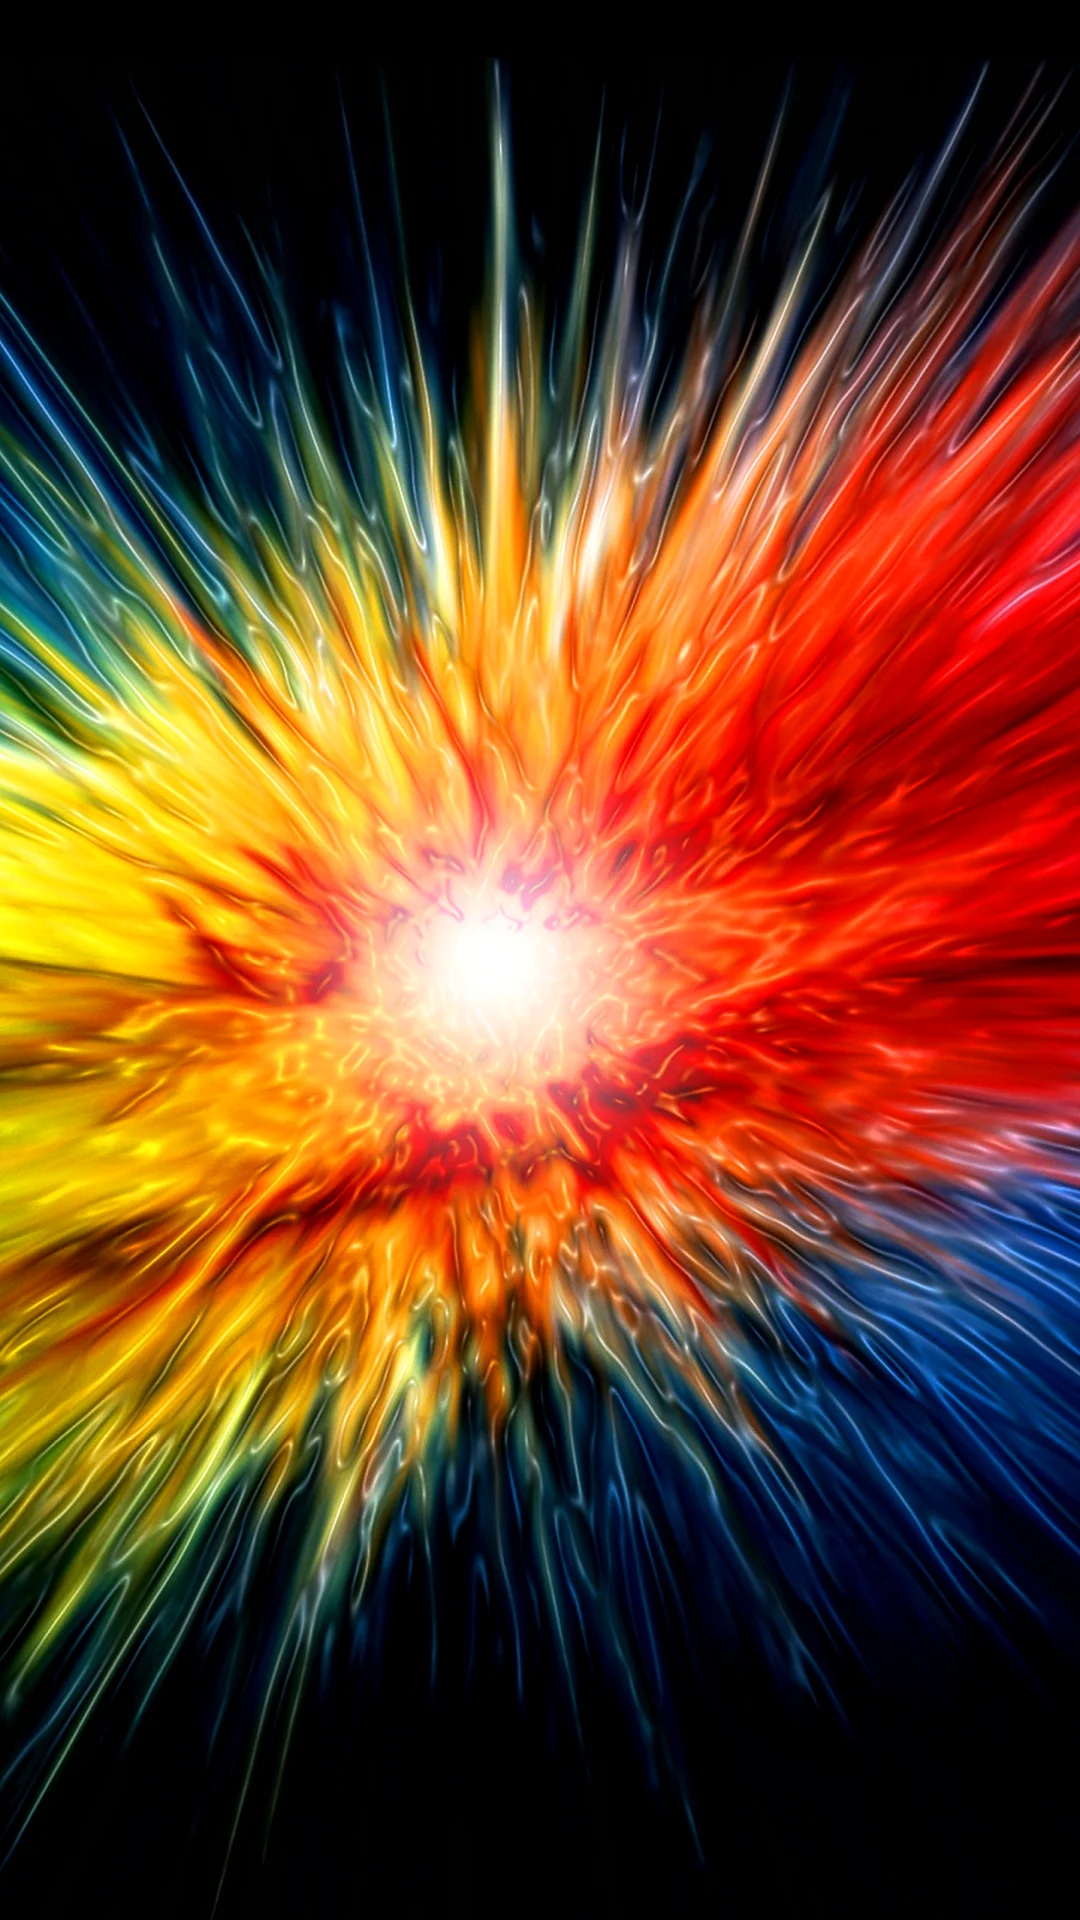 Explosion Wallpaper For iPhone